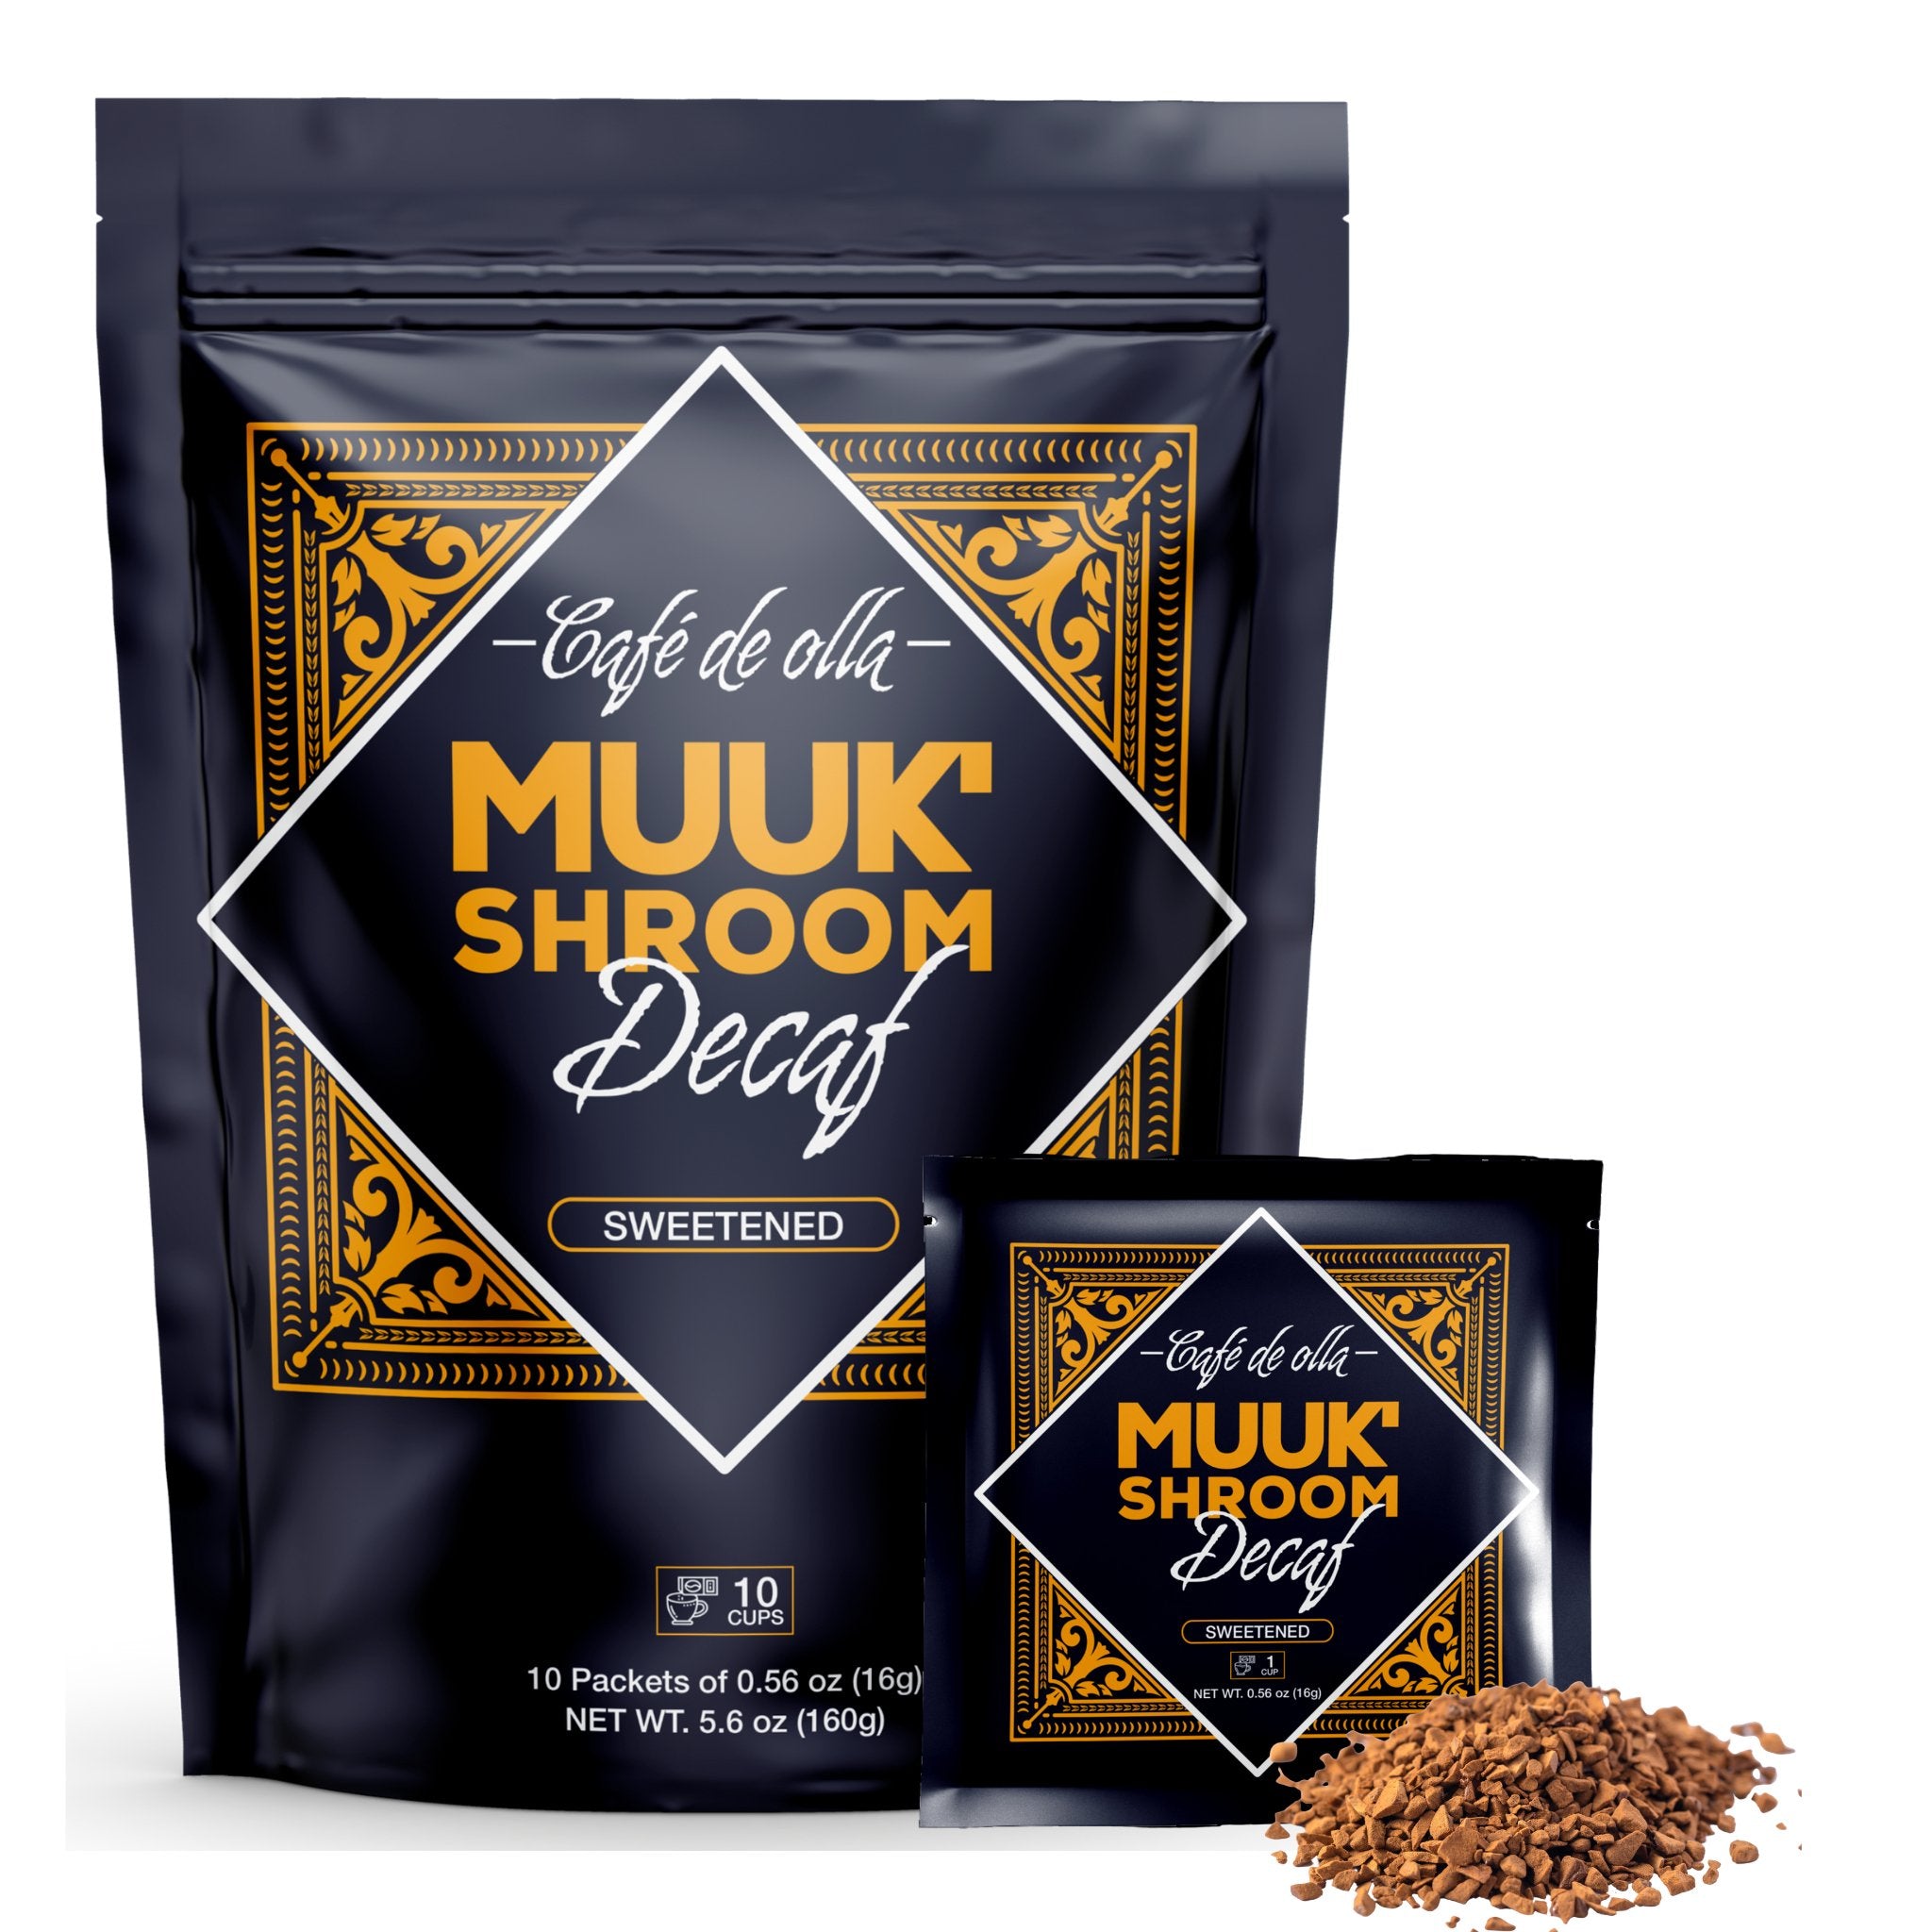 Sweetened Decaf Café de Olla Instant Coffee with Adaptogen Superfoods Blend - MUUK' SUPERFOODS US